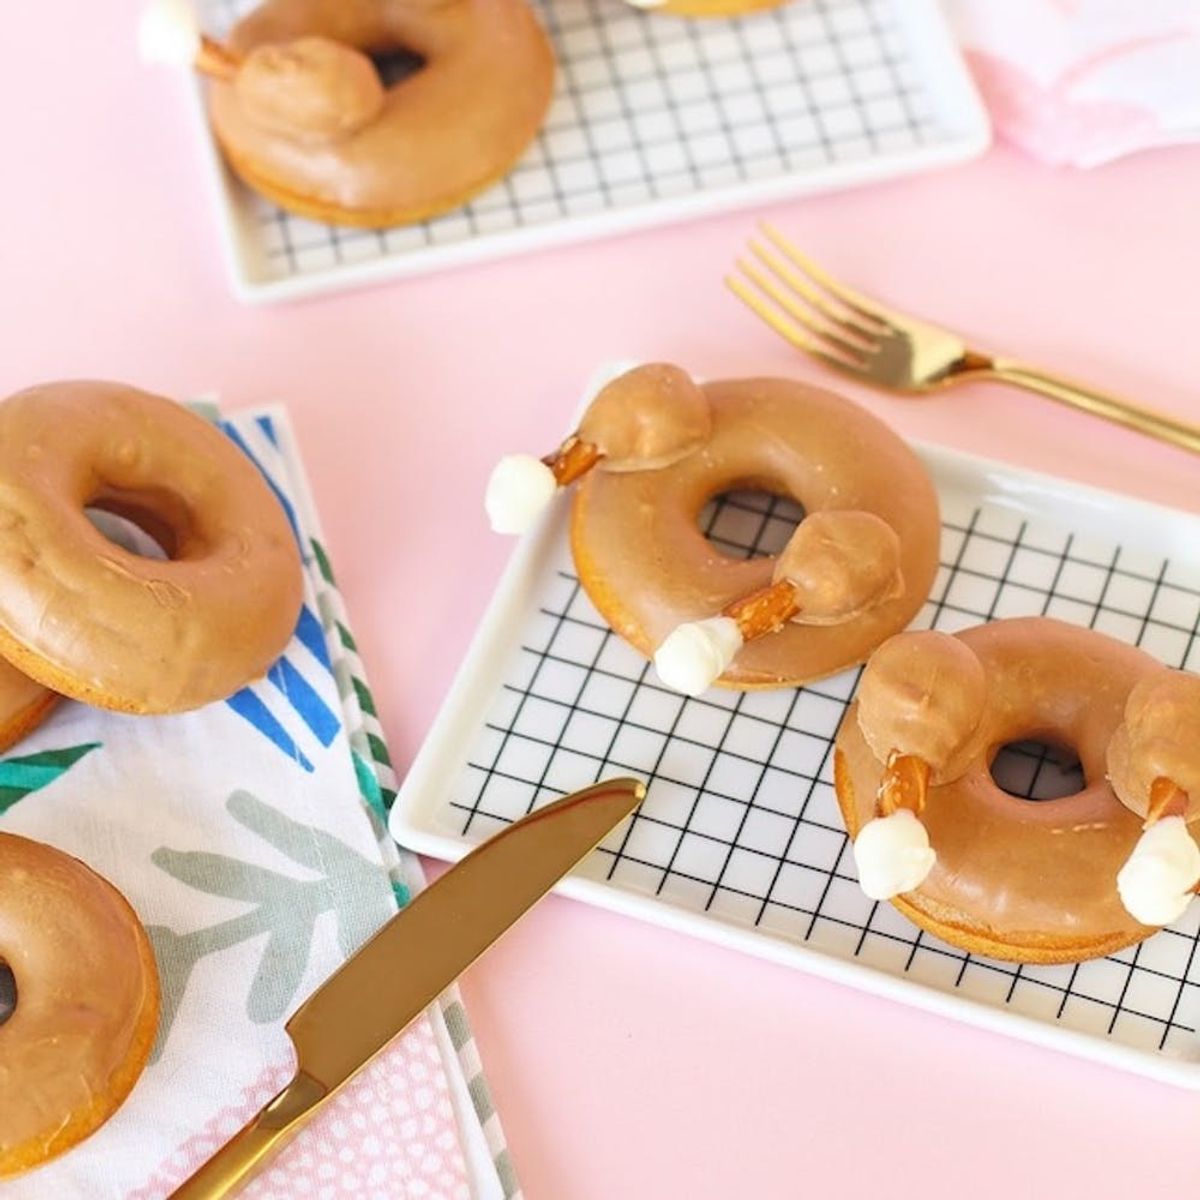 What to Make This Weekend: Turkey Donuts, DIY Wreaths + More